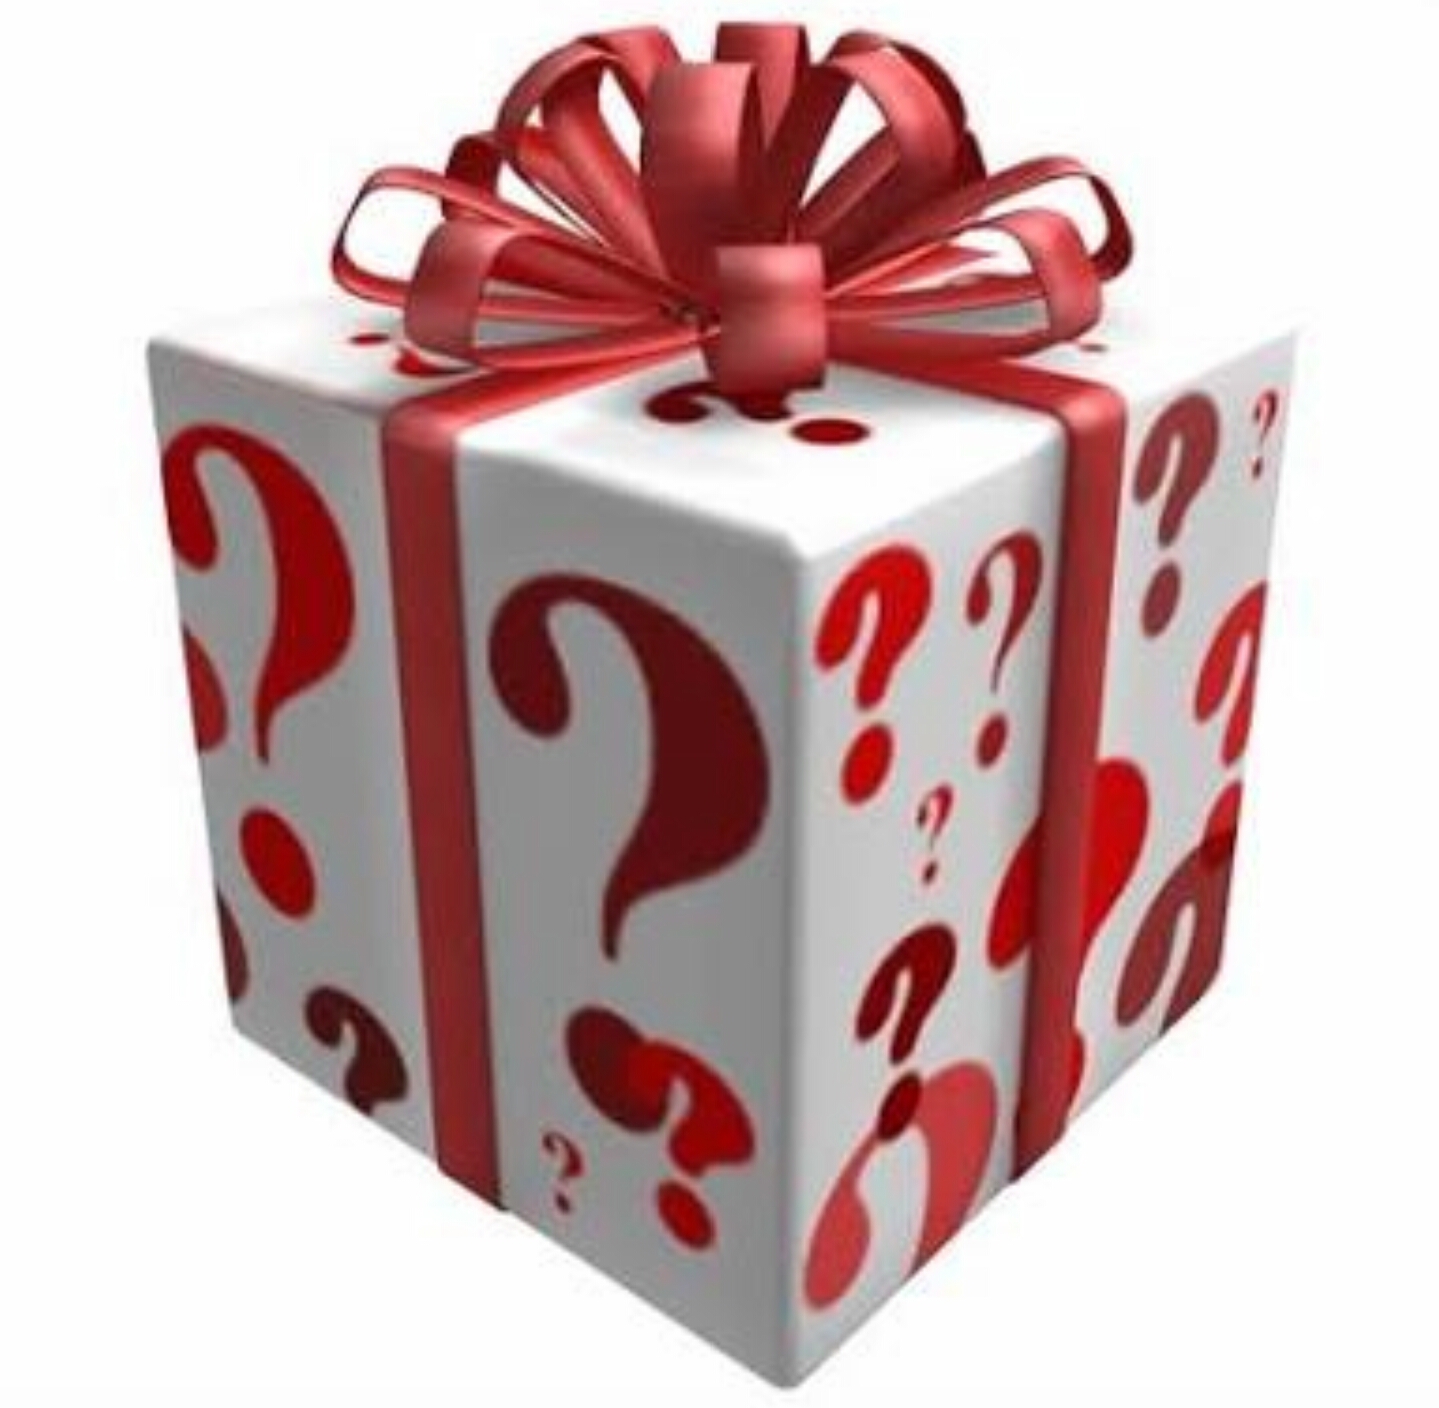 prize clipart mystery present